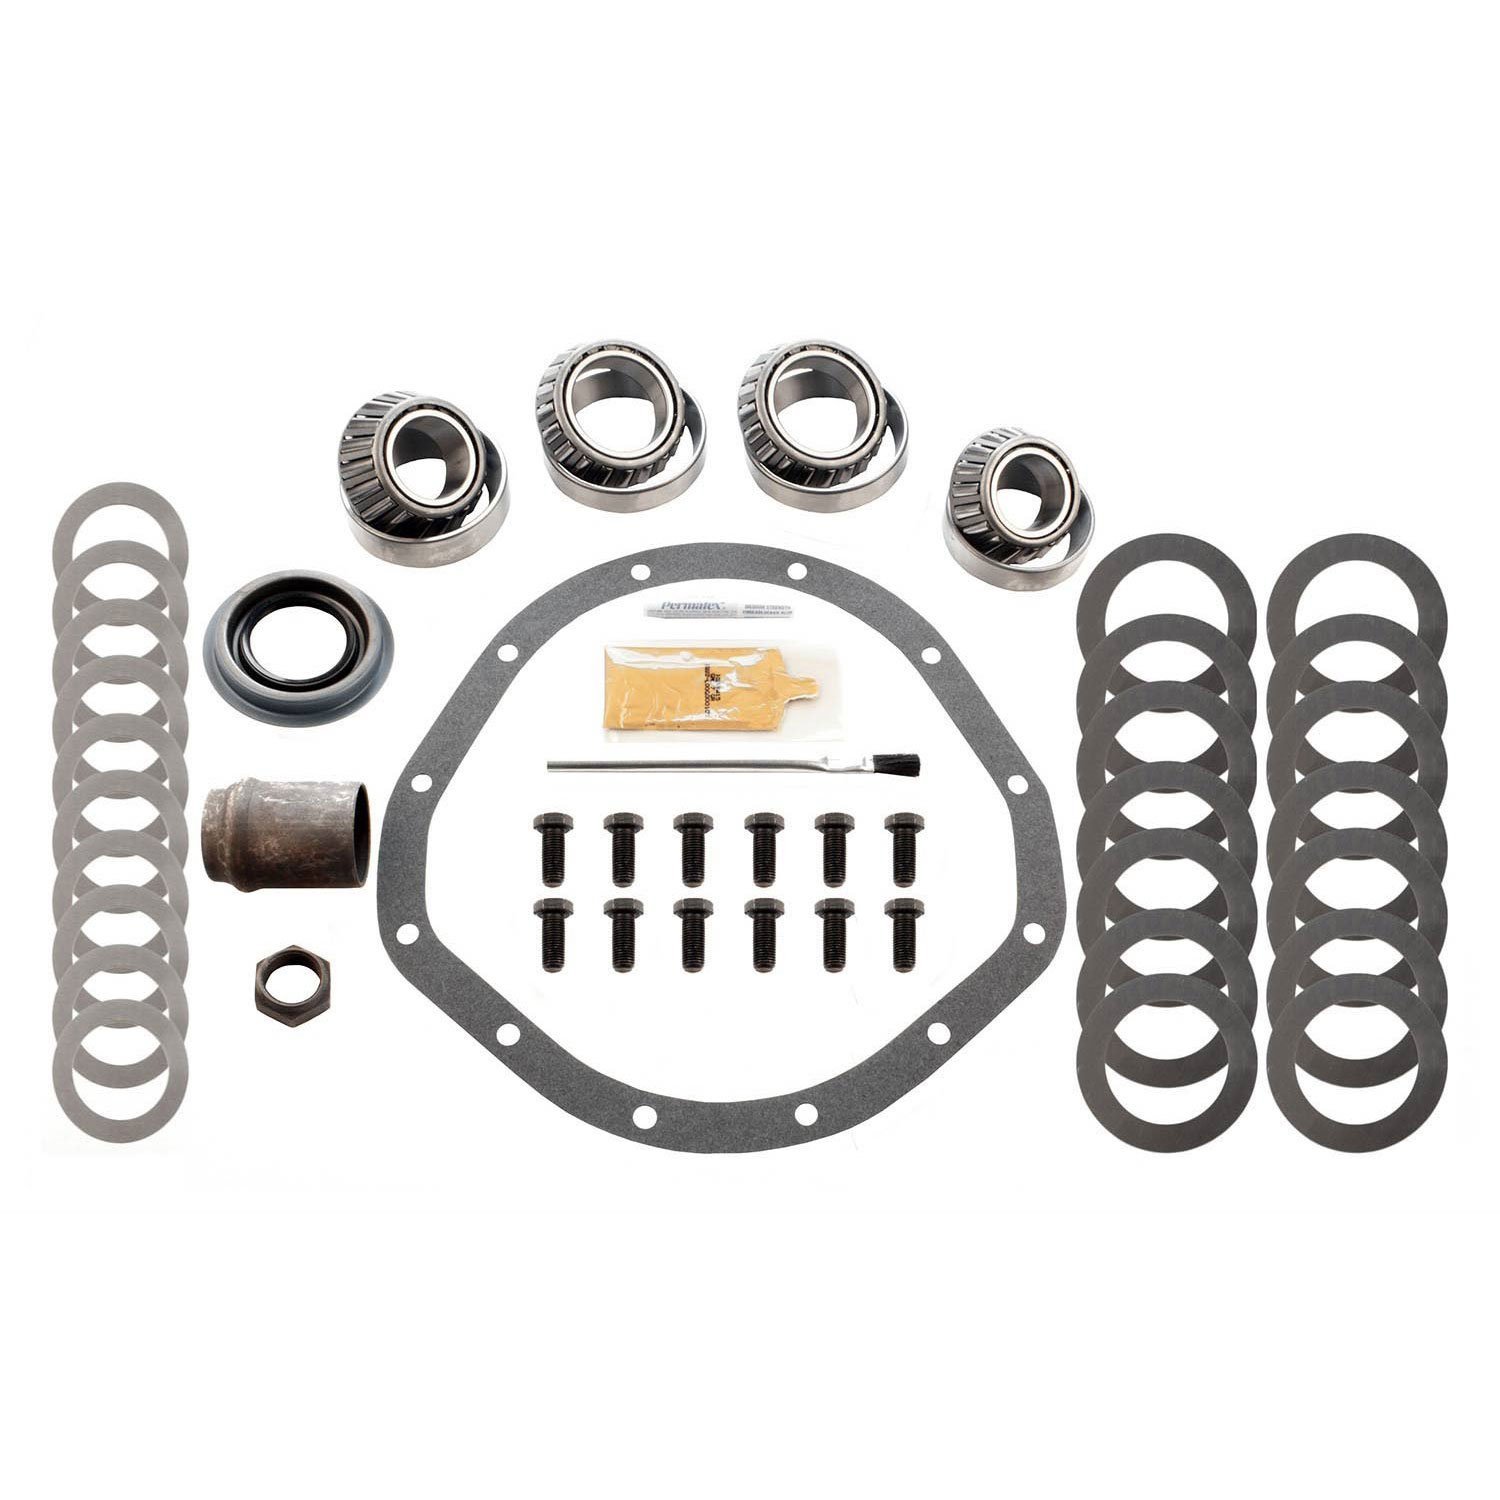 Differential Complete Kit 8.875" 12 Bolt